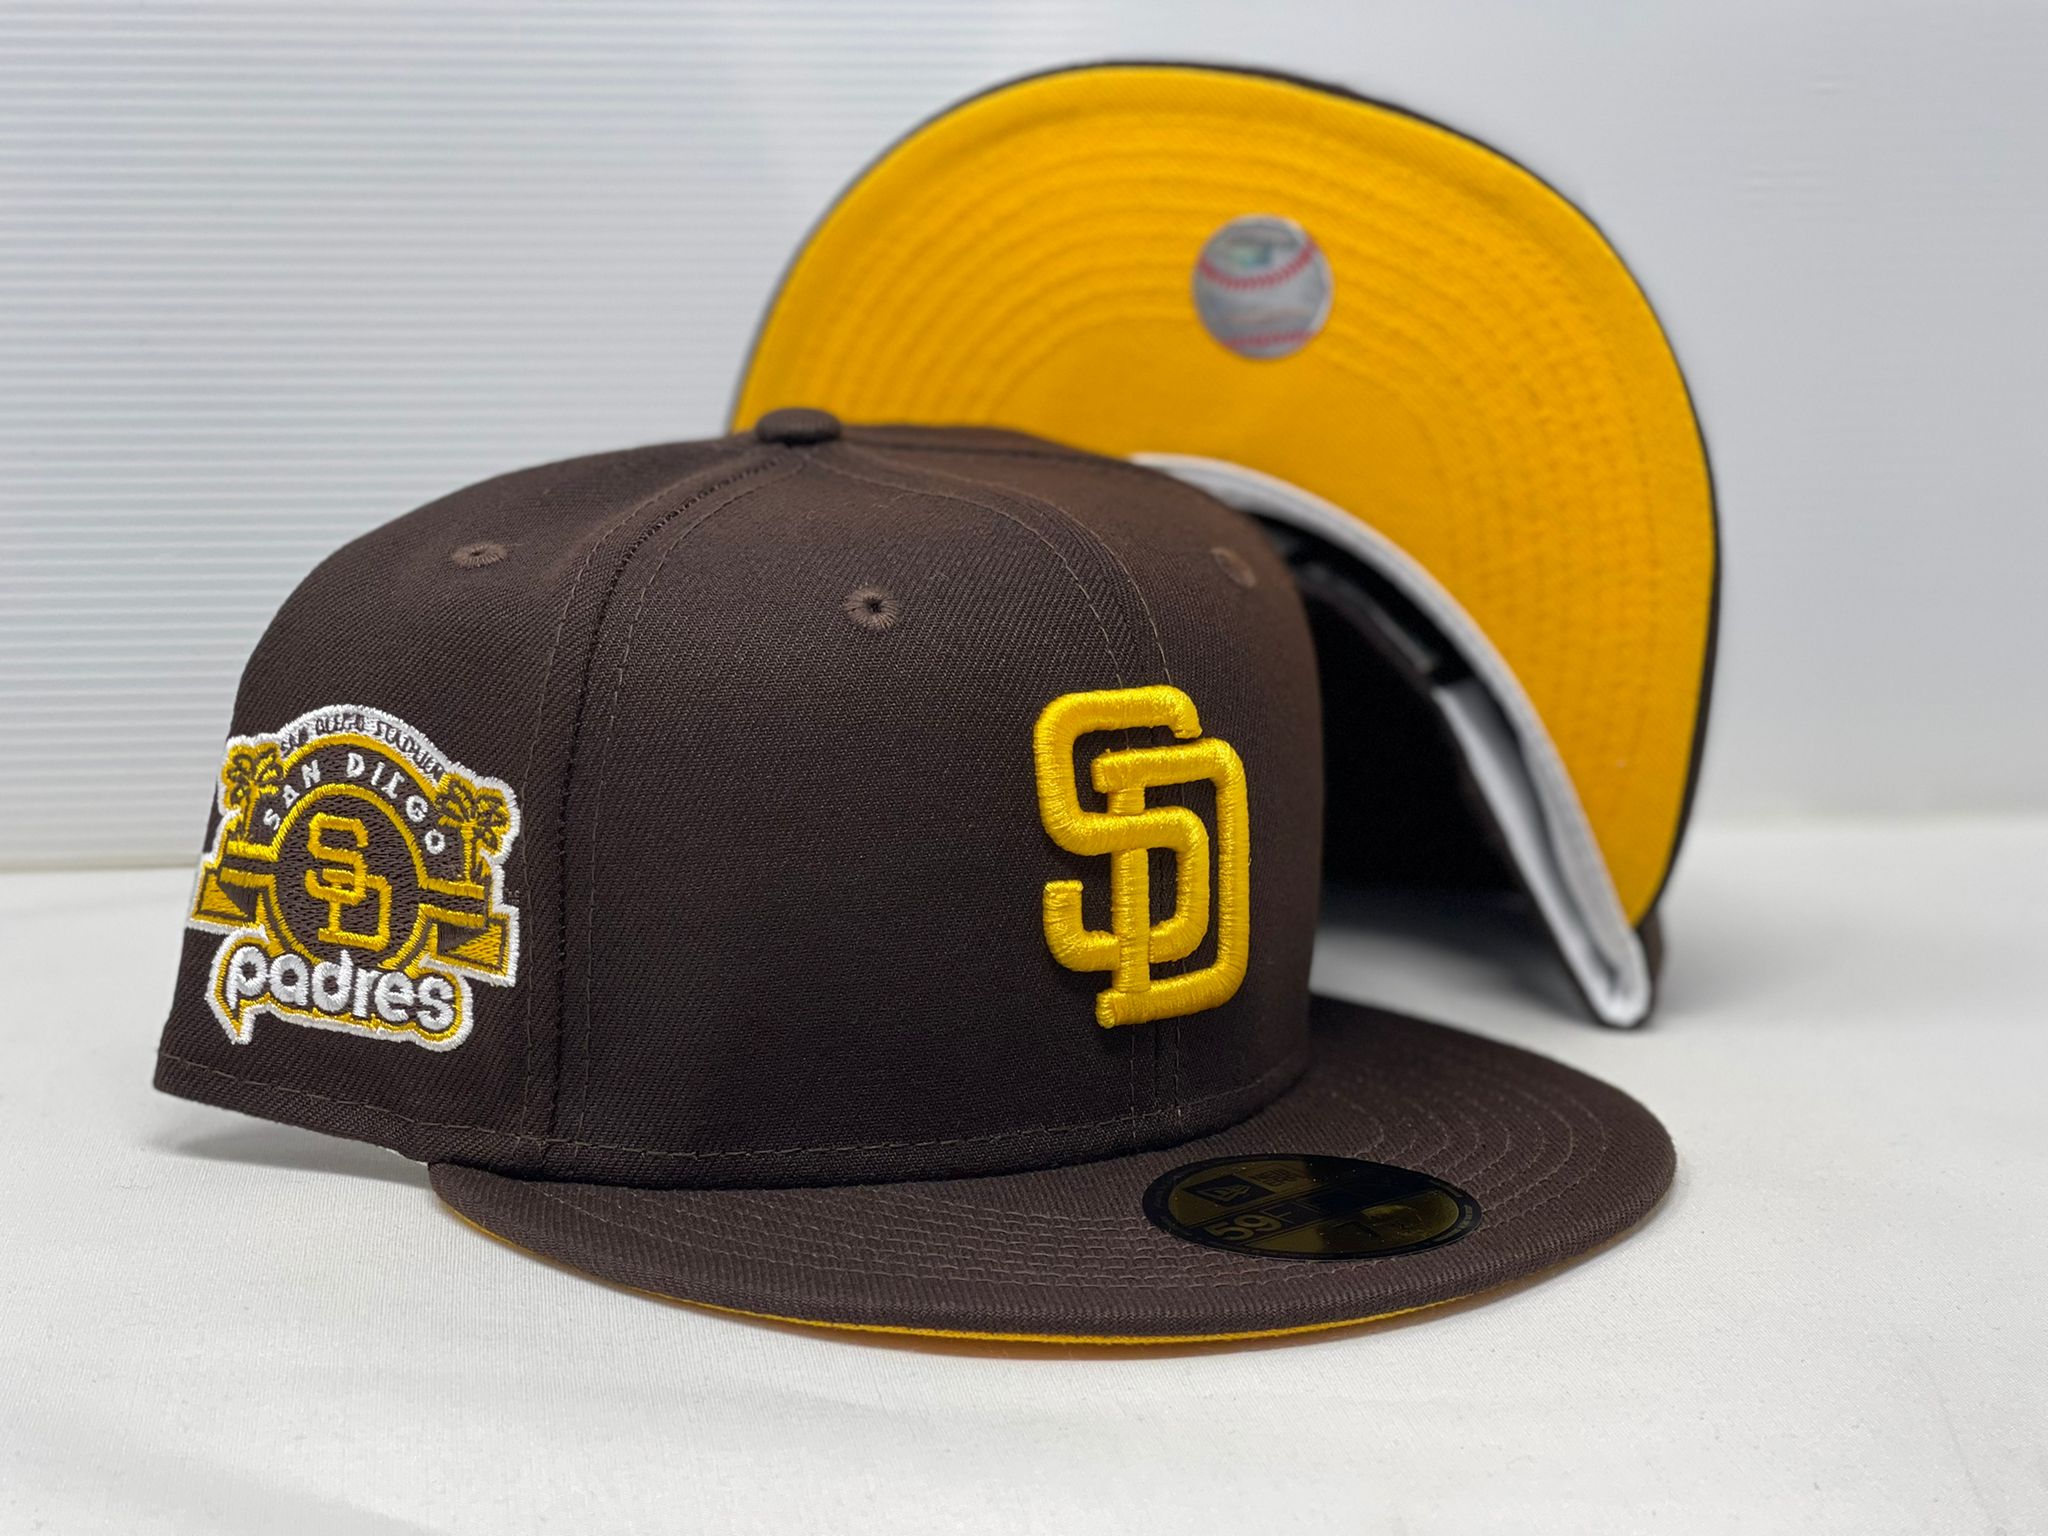 Padres] First look in brown and gold 😍 : r/Padres